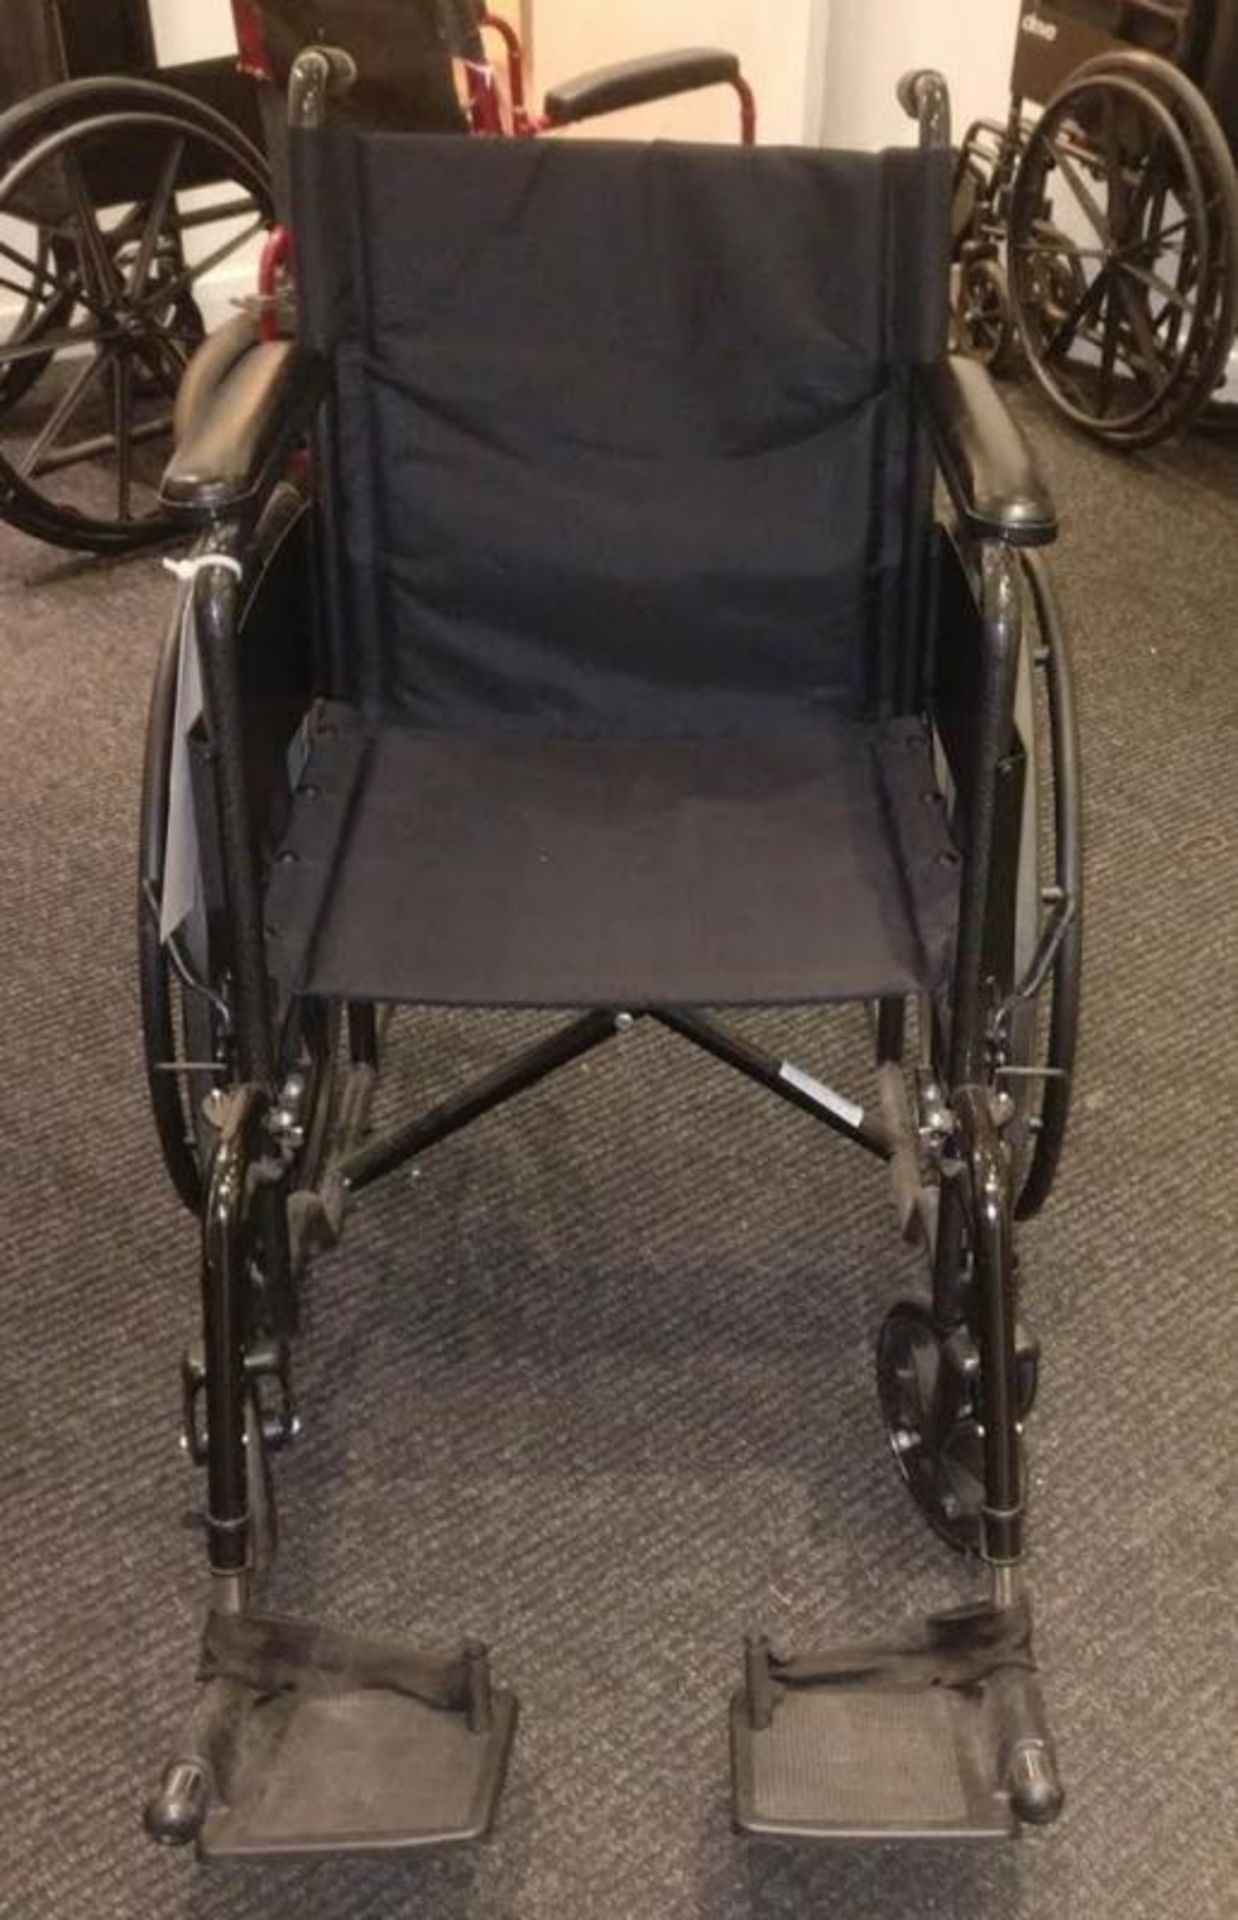 1 x Drive Silver Sport Self Propel Wheelchair With 18st Capacity - Comes in Good Condition as Pictur - Image 2 of 3